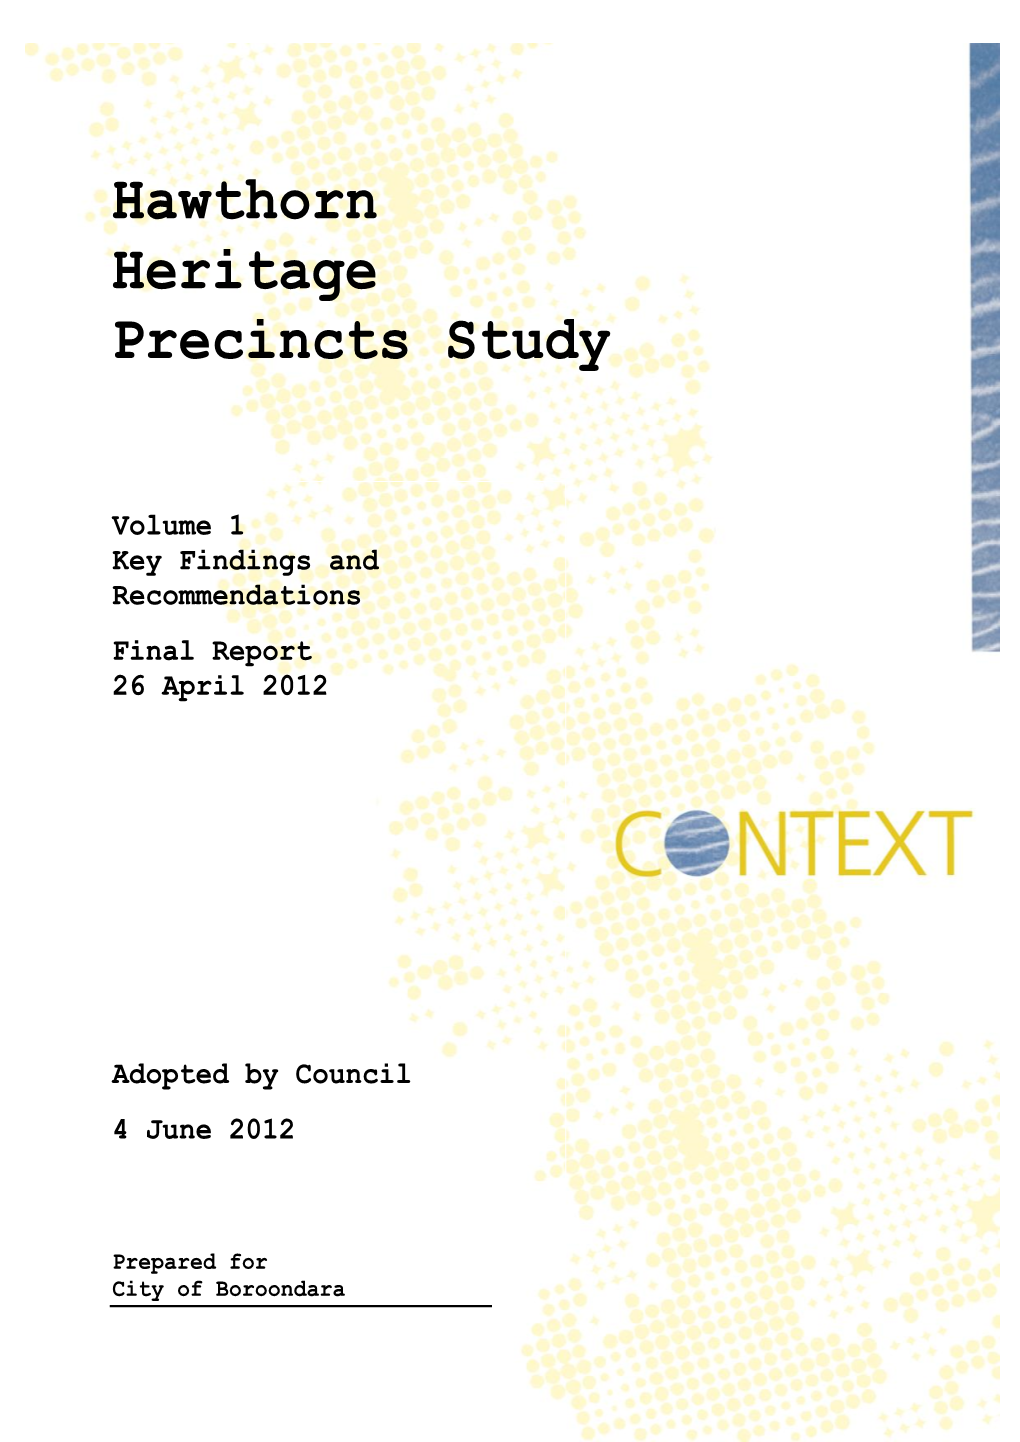 Heritage Study, (Meredith Gould, 1993)